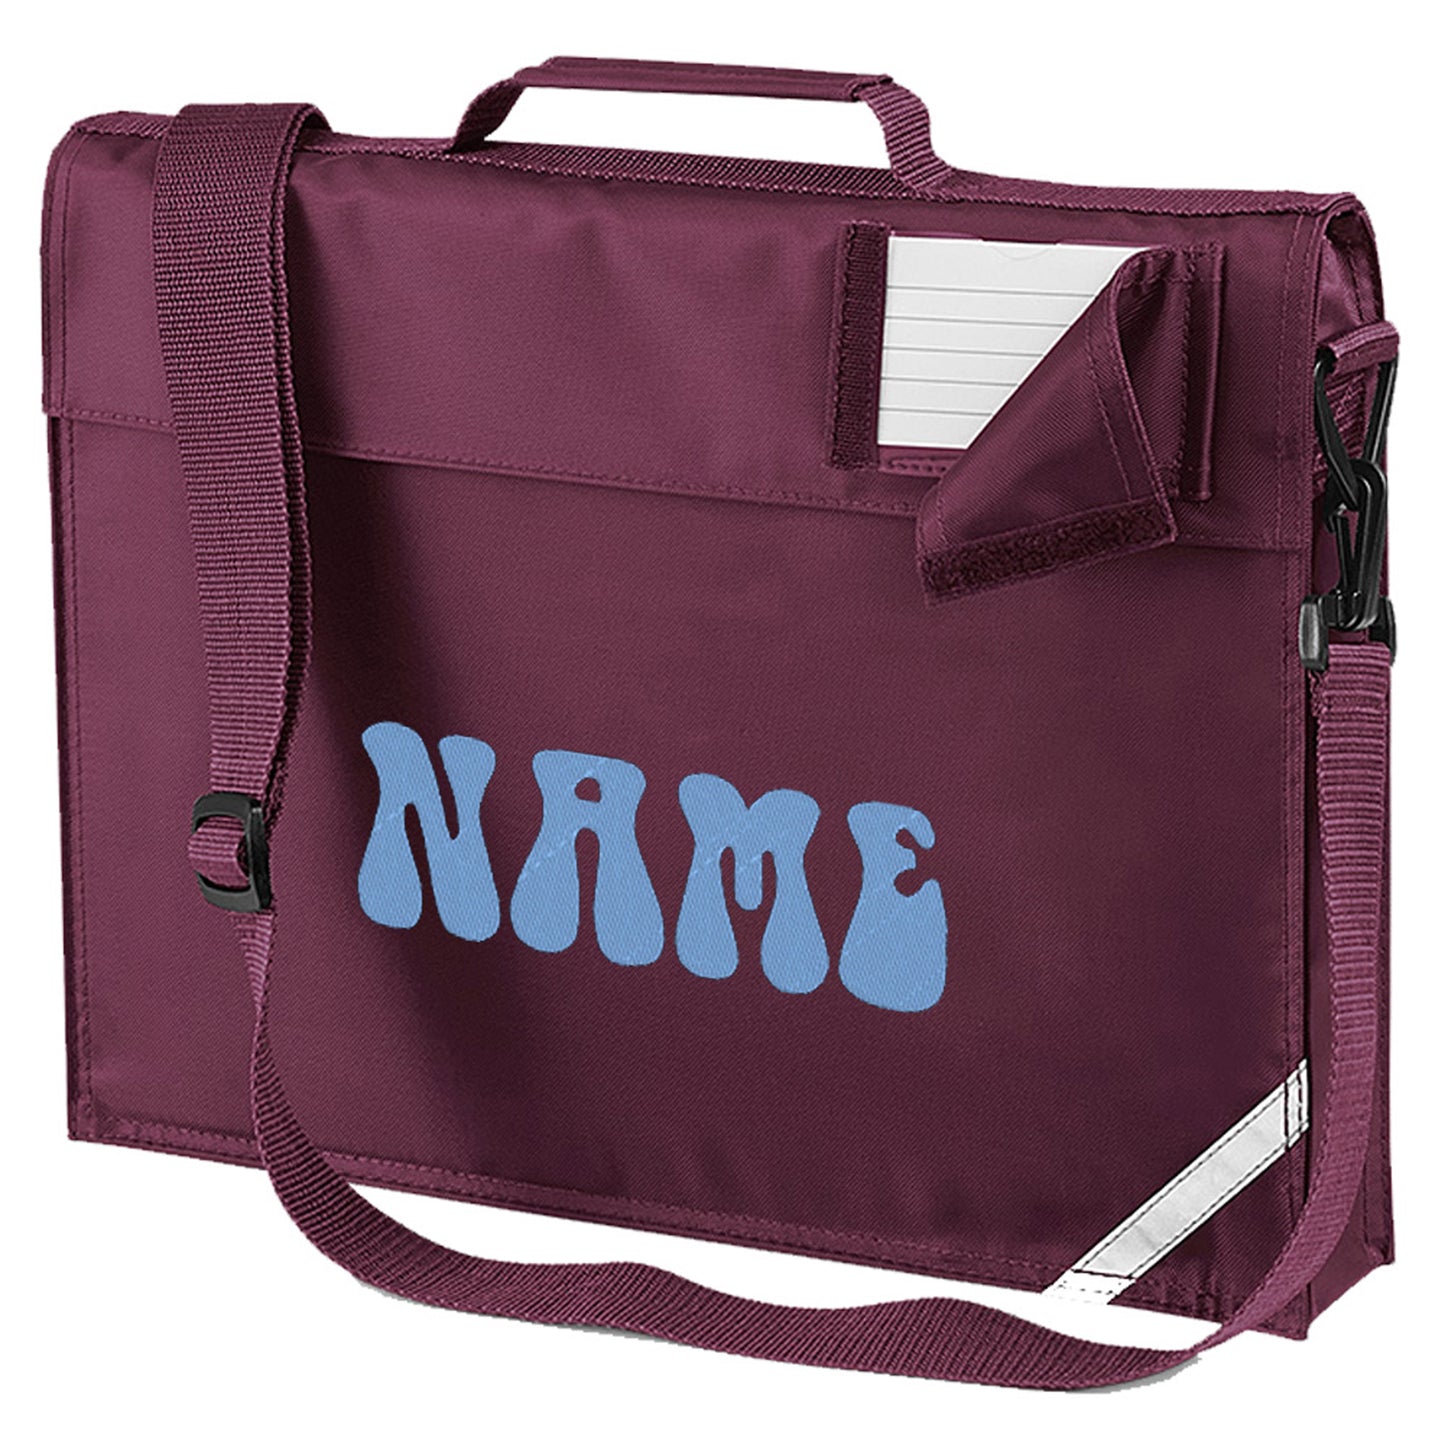 Embroidered Bookbag with strap- 70's Text